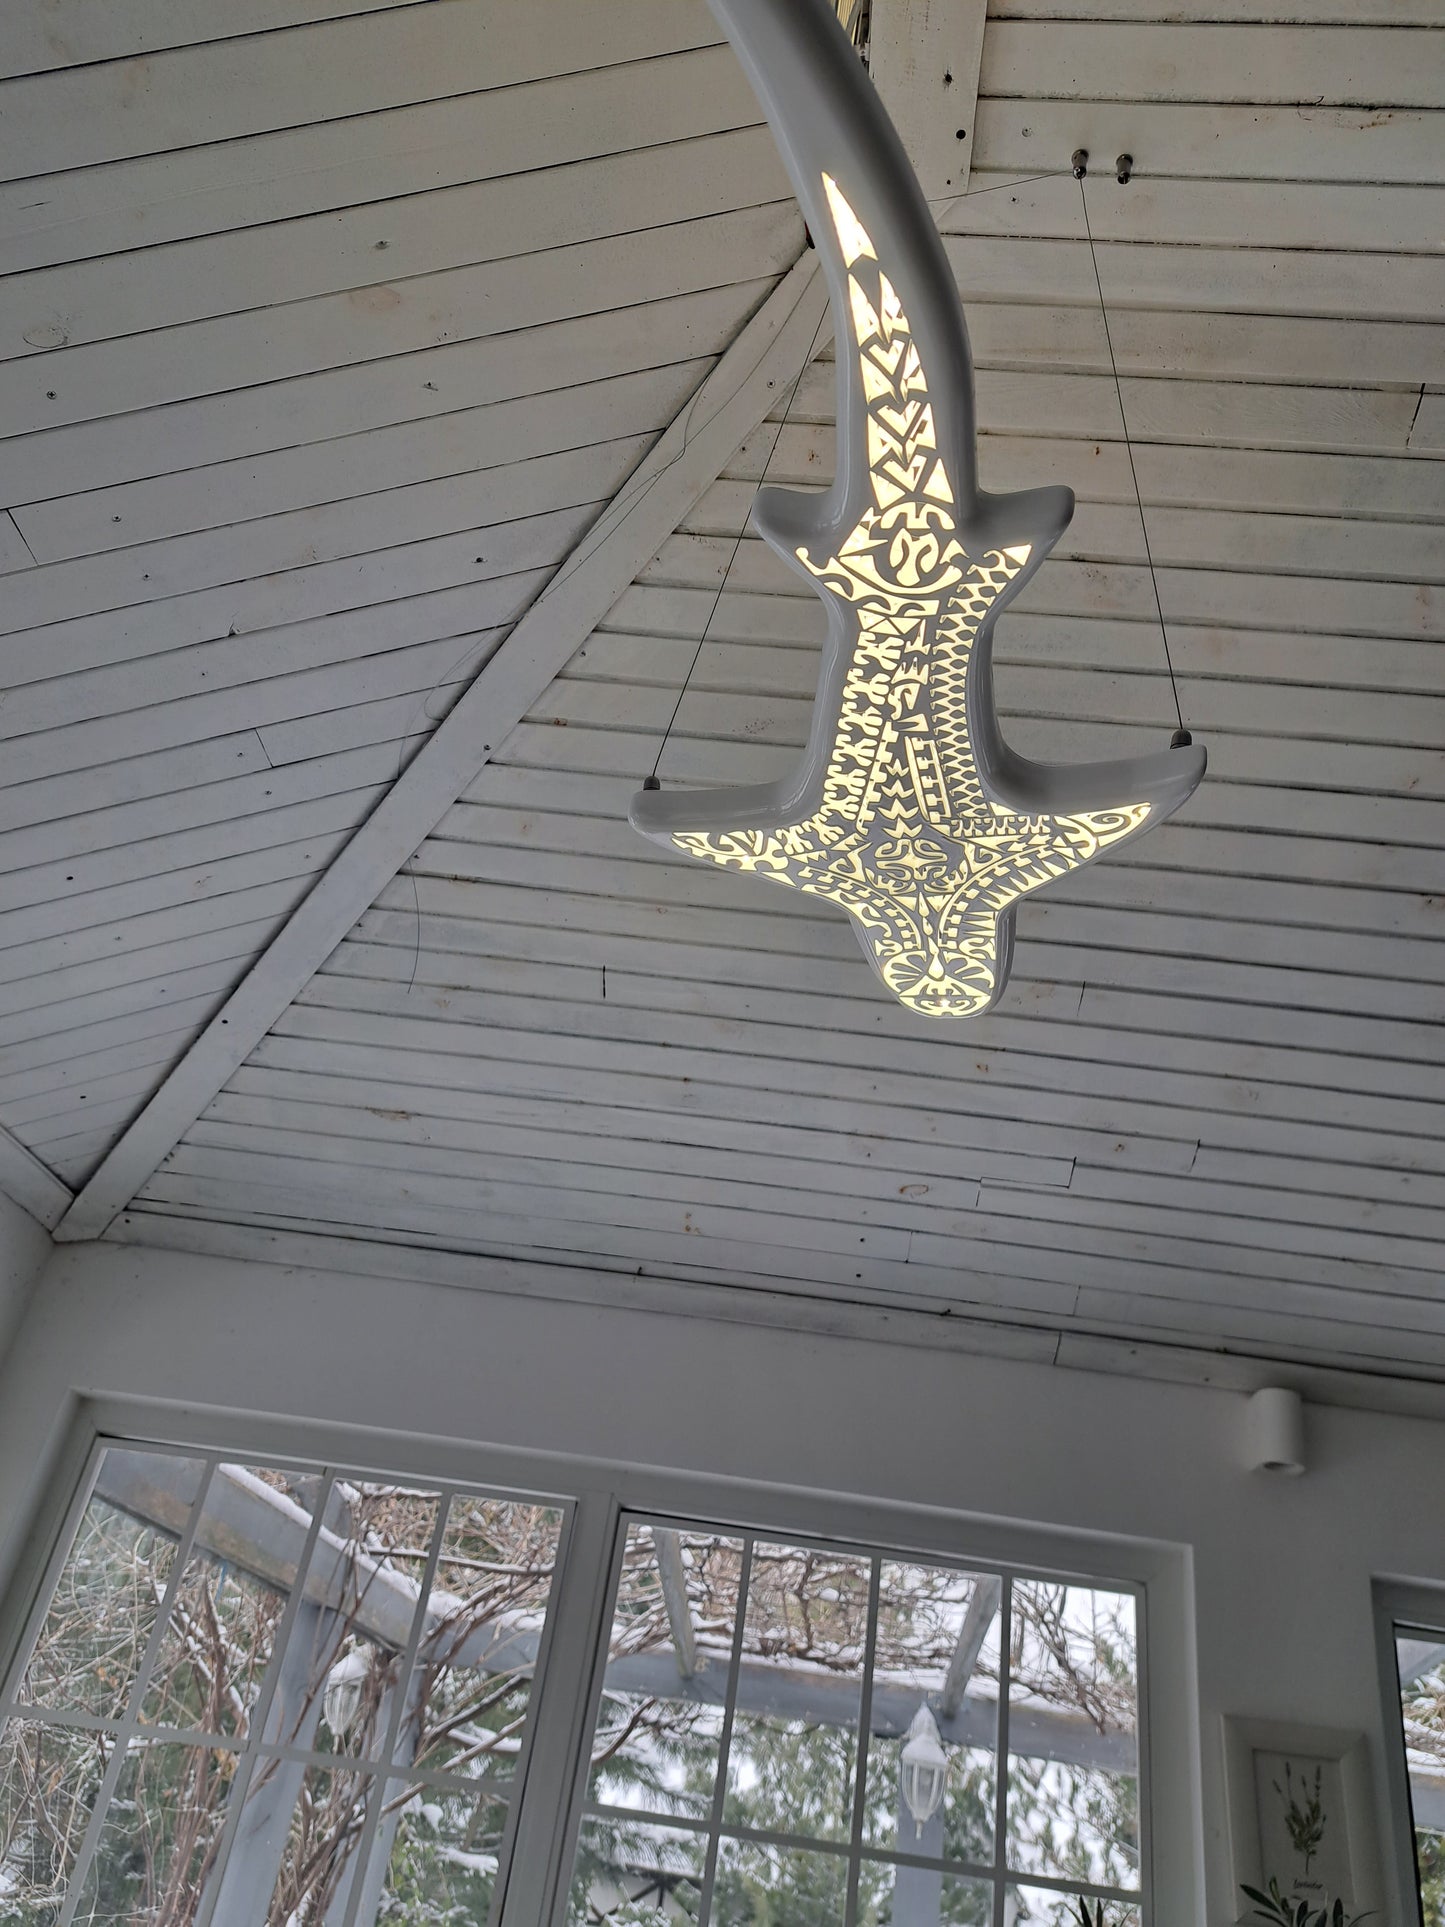 Lamp Polinesian and Maori surf Decor - Unique Wooden Shark-Shaped Ceiling Chandelier